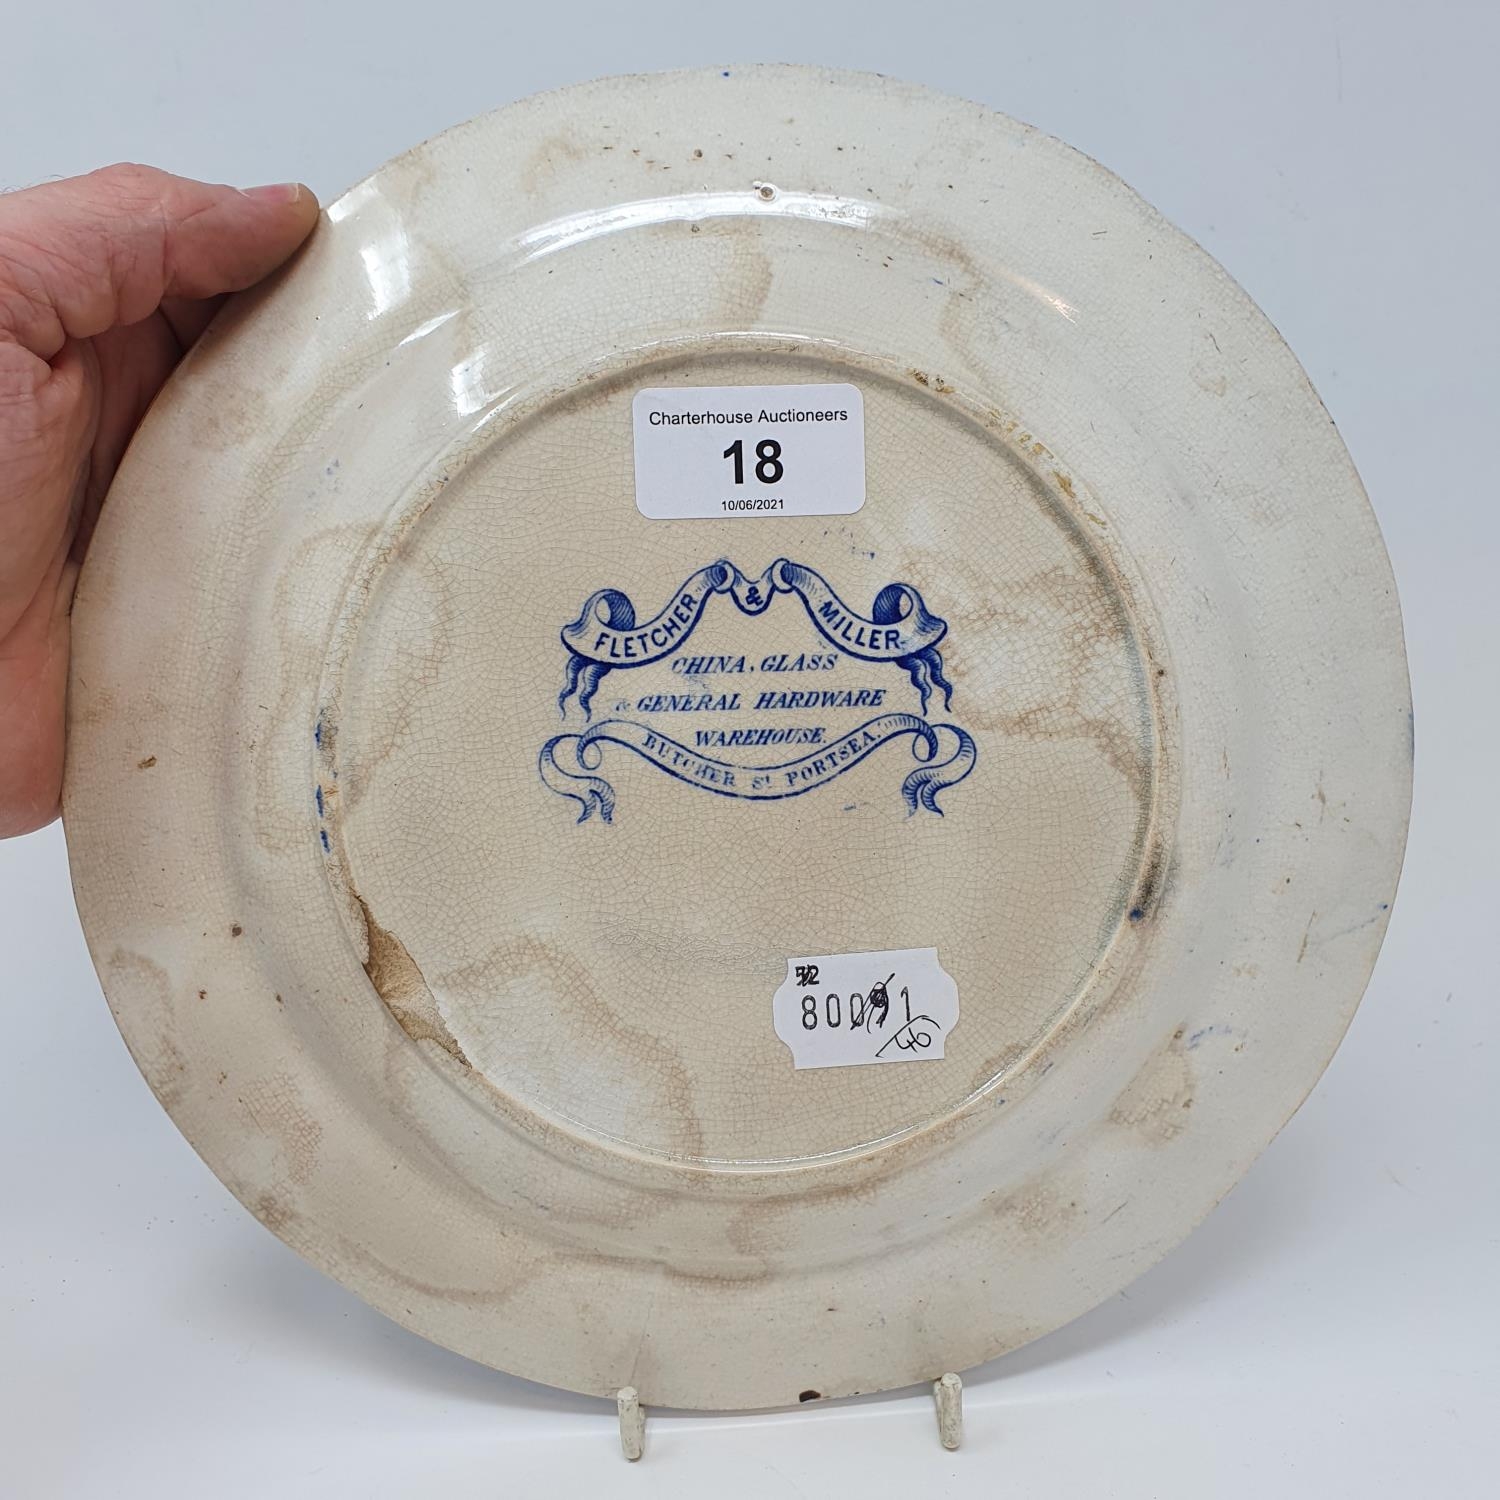 A 19th century Royal Navy Mess No 1 pottery plate, with Fletcher & Miller, Butcher St Portsea - Image 2 of 2